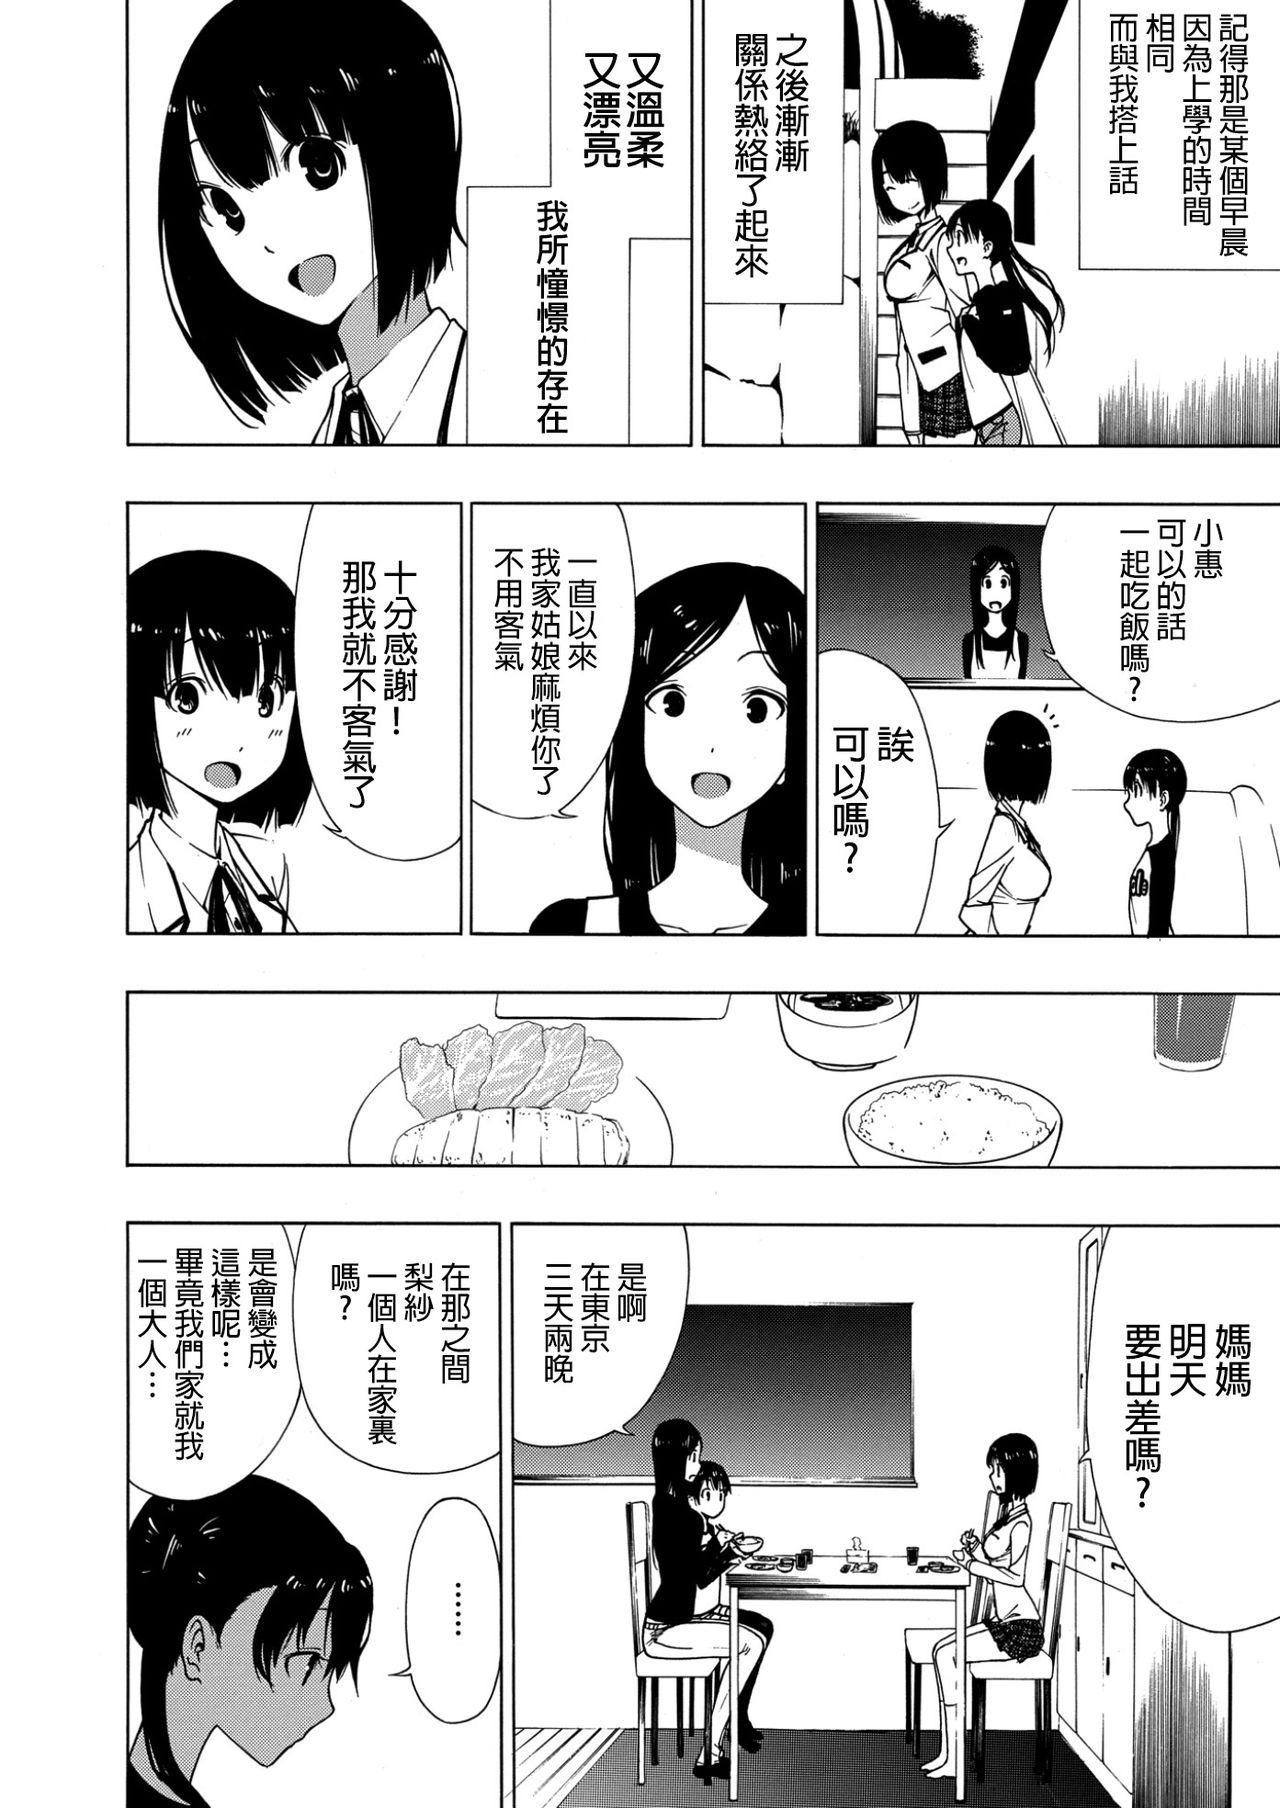 Reversecowgirl Akogare no Onee-san | 憧憬的姐姐 Doctor - Page 5